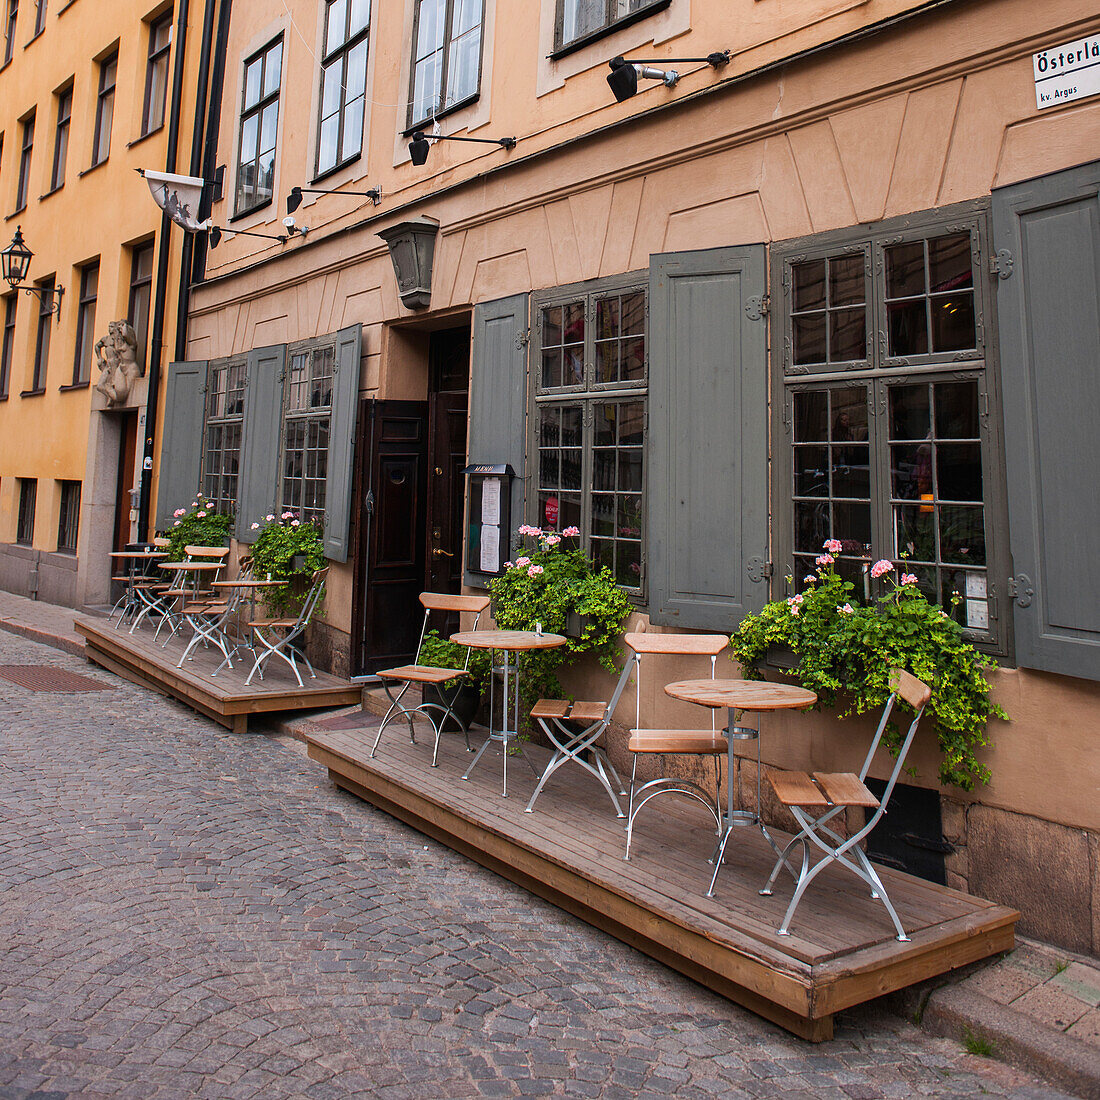 Small Tables And Chairs On A Patio Outside A Restaurant; Stockholm Sweden